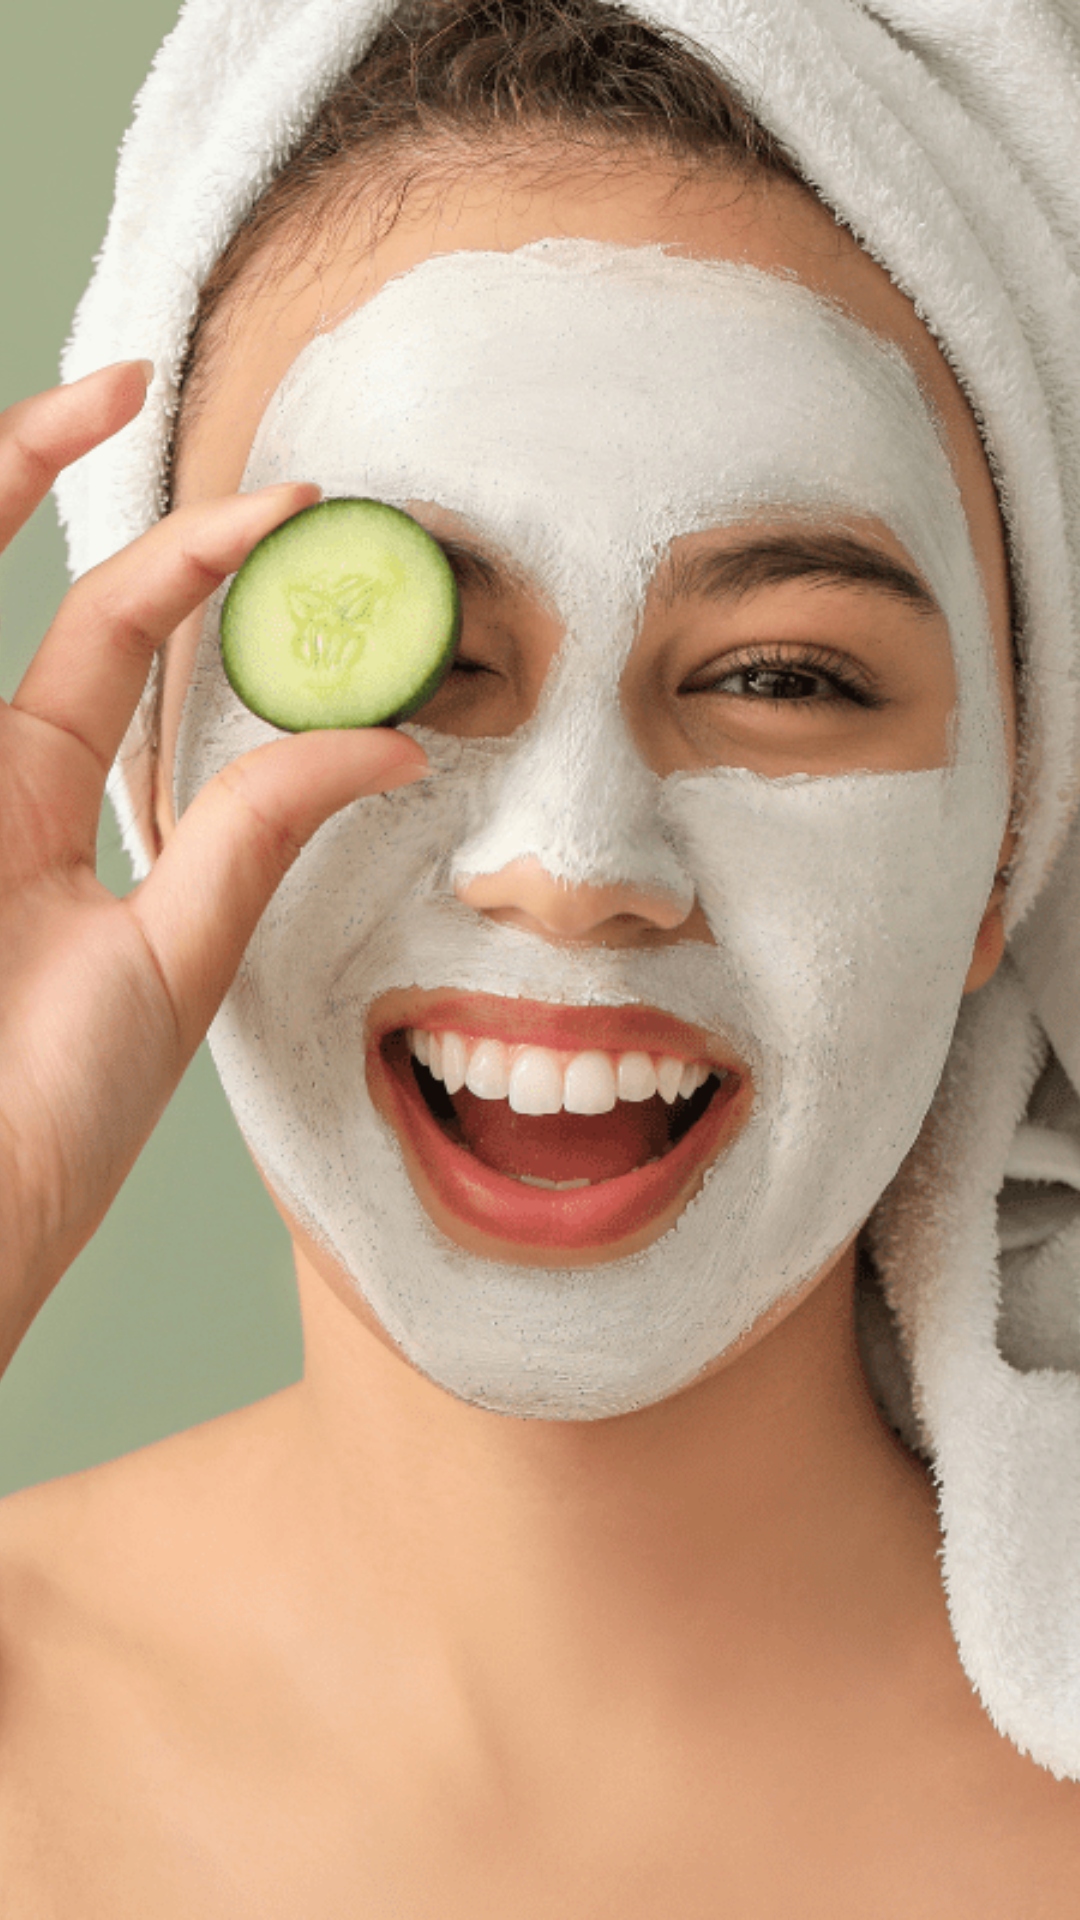 5 DIY cooling face masks to beat the summer heat